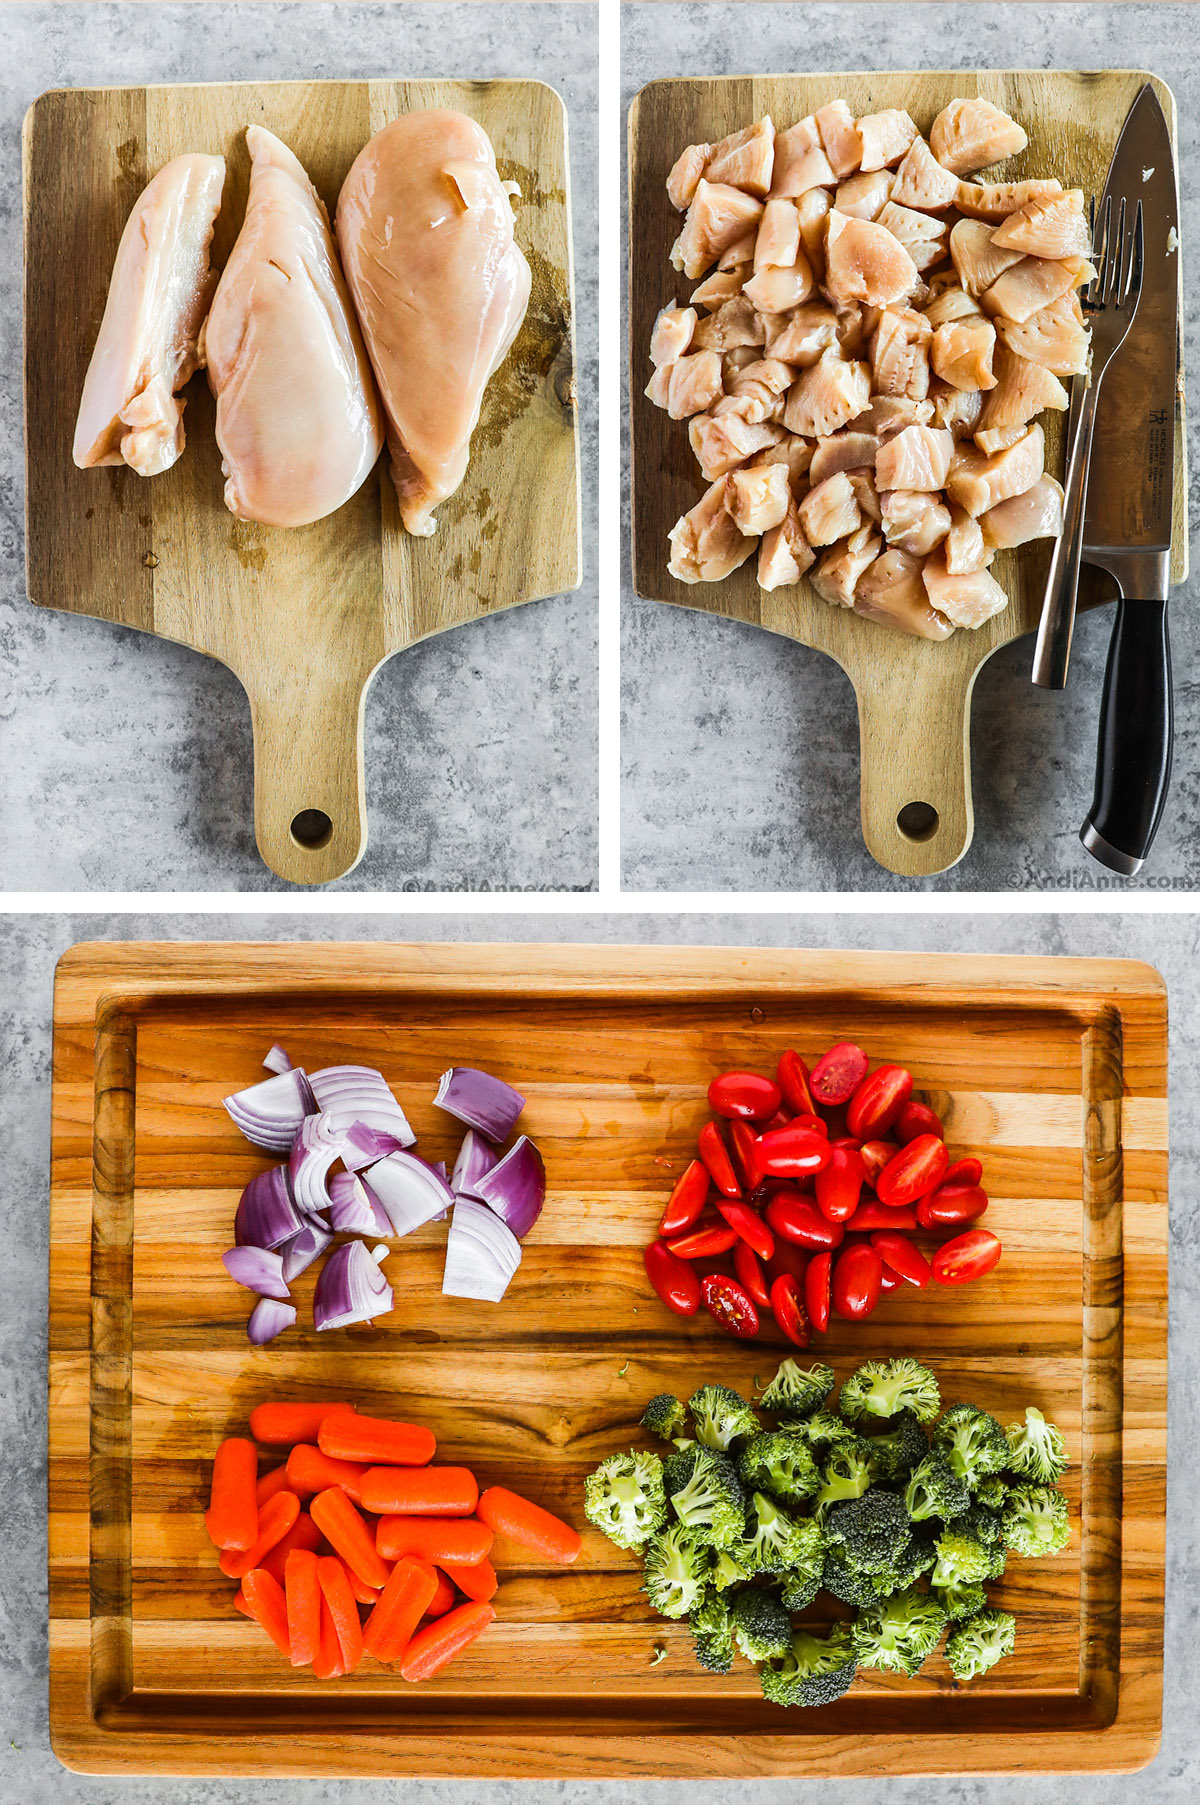 Chicken breasts on a cutting board, then chopped, and chopped onion, tomatoes, carrots and broccoli on a separate cutting board.